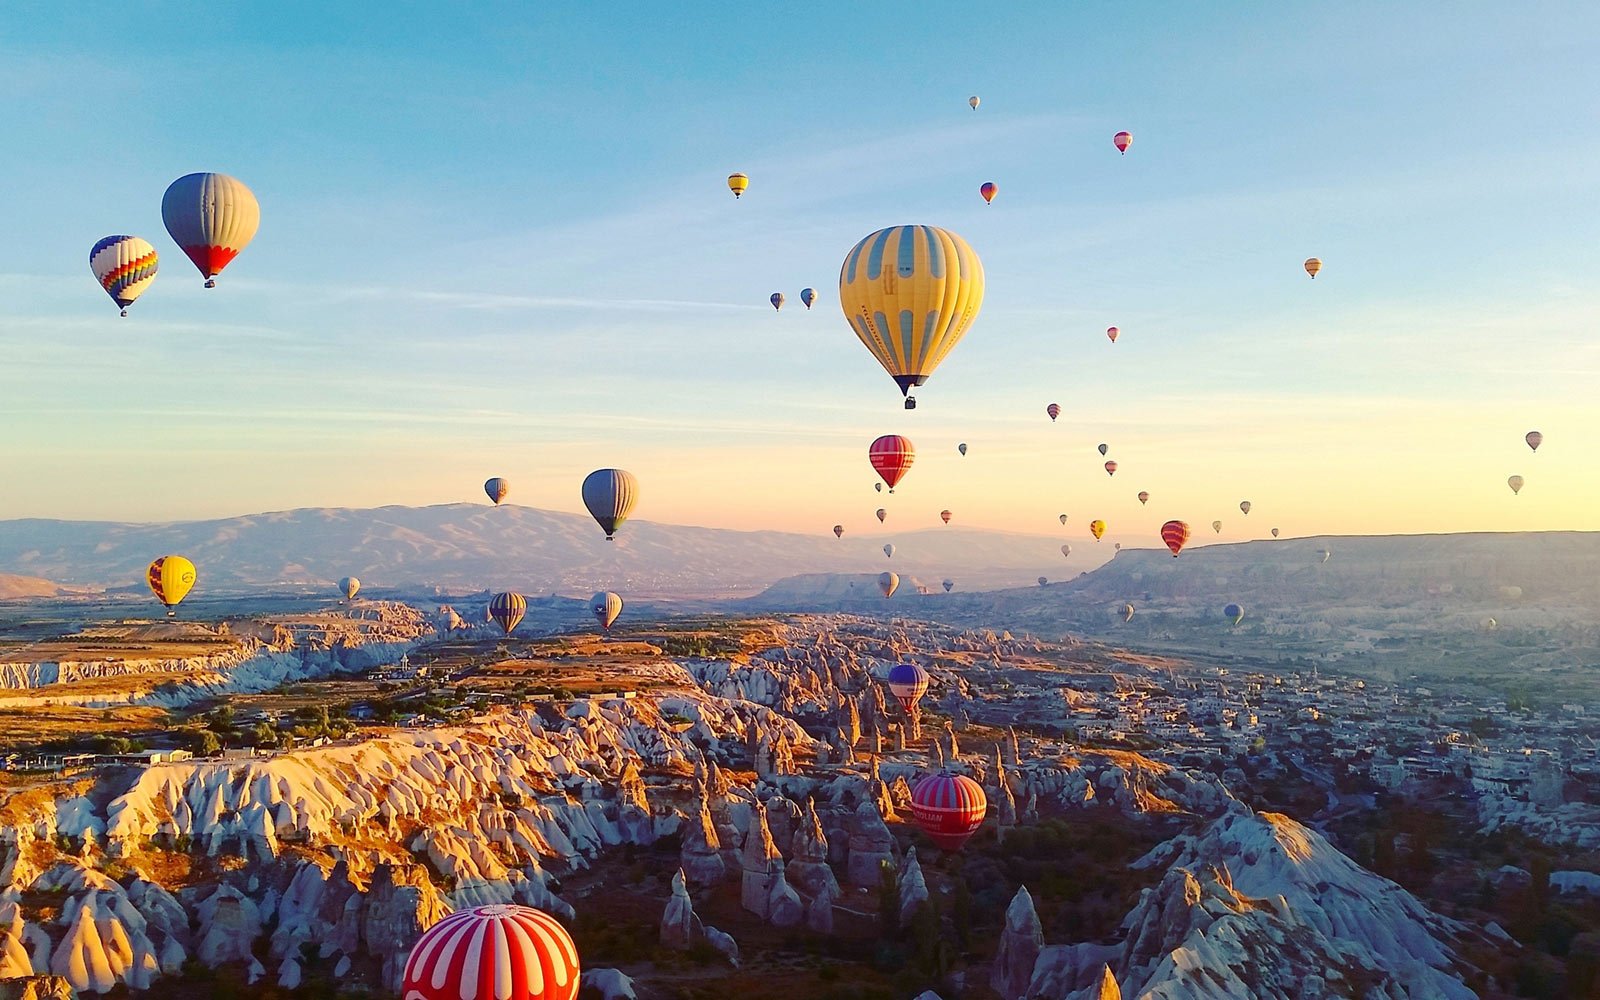 Why Are There So Many Hot Air Balloons In Cappadocia?